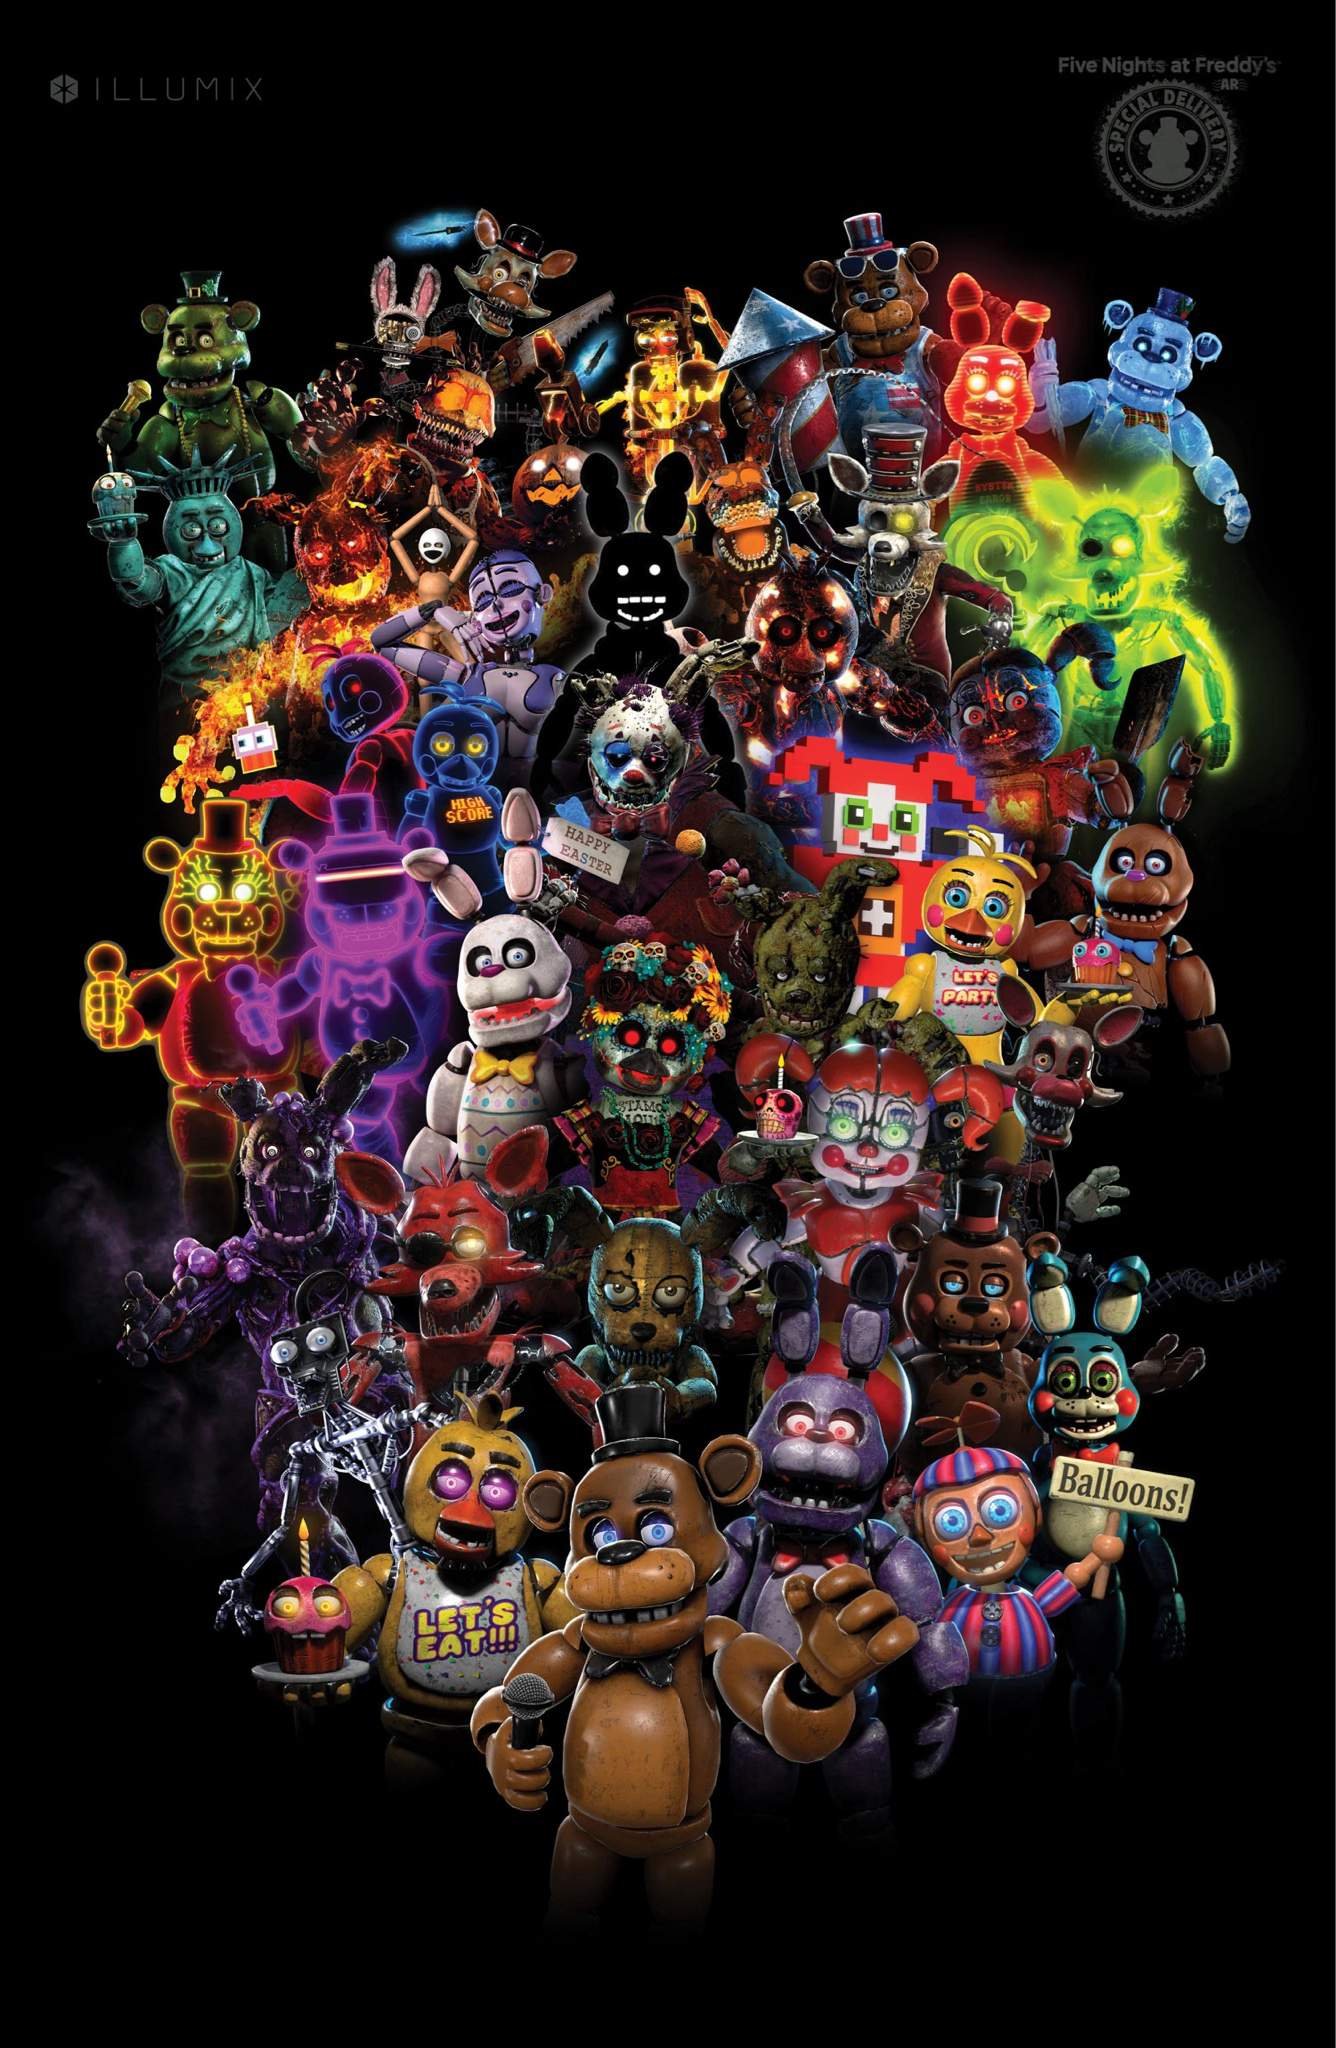 Sequel to 'Five Nights at Freddy's' On The Way - mxdwn Games